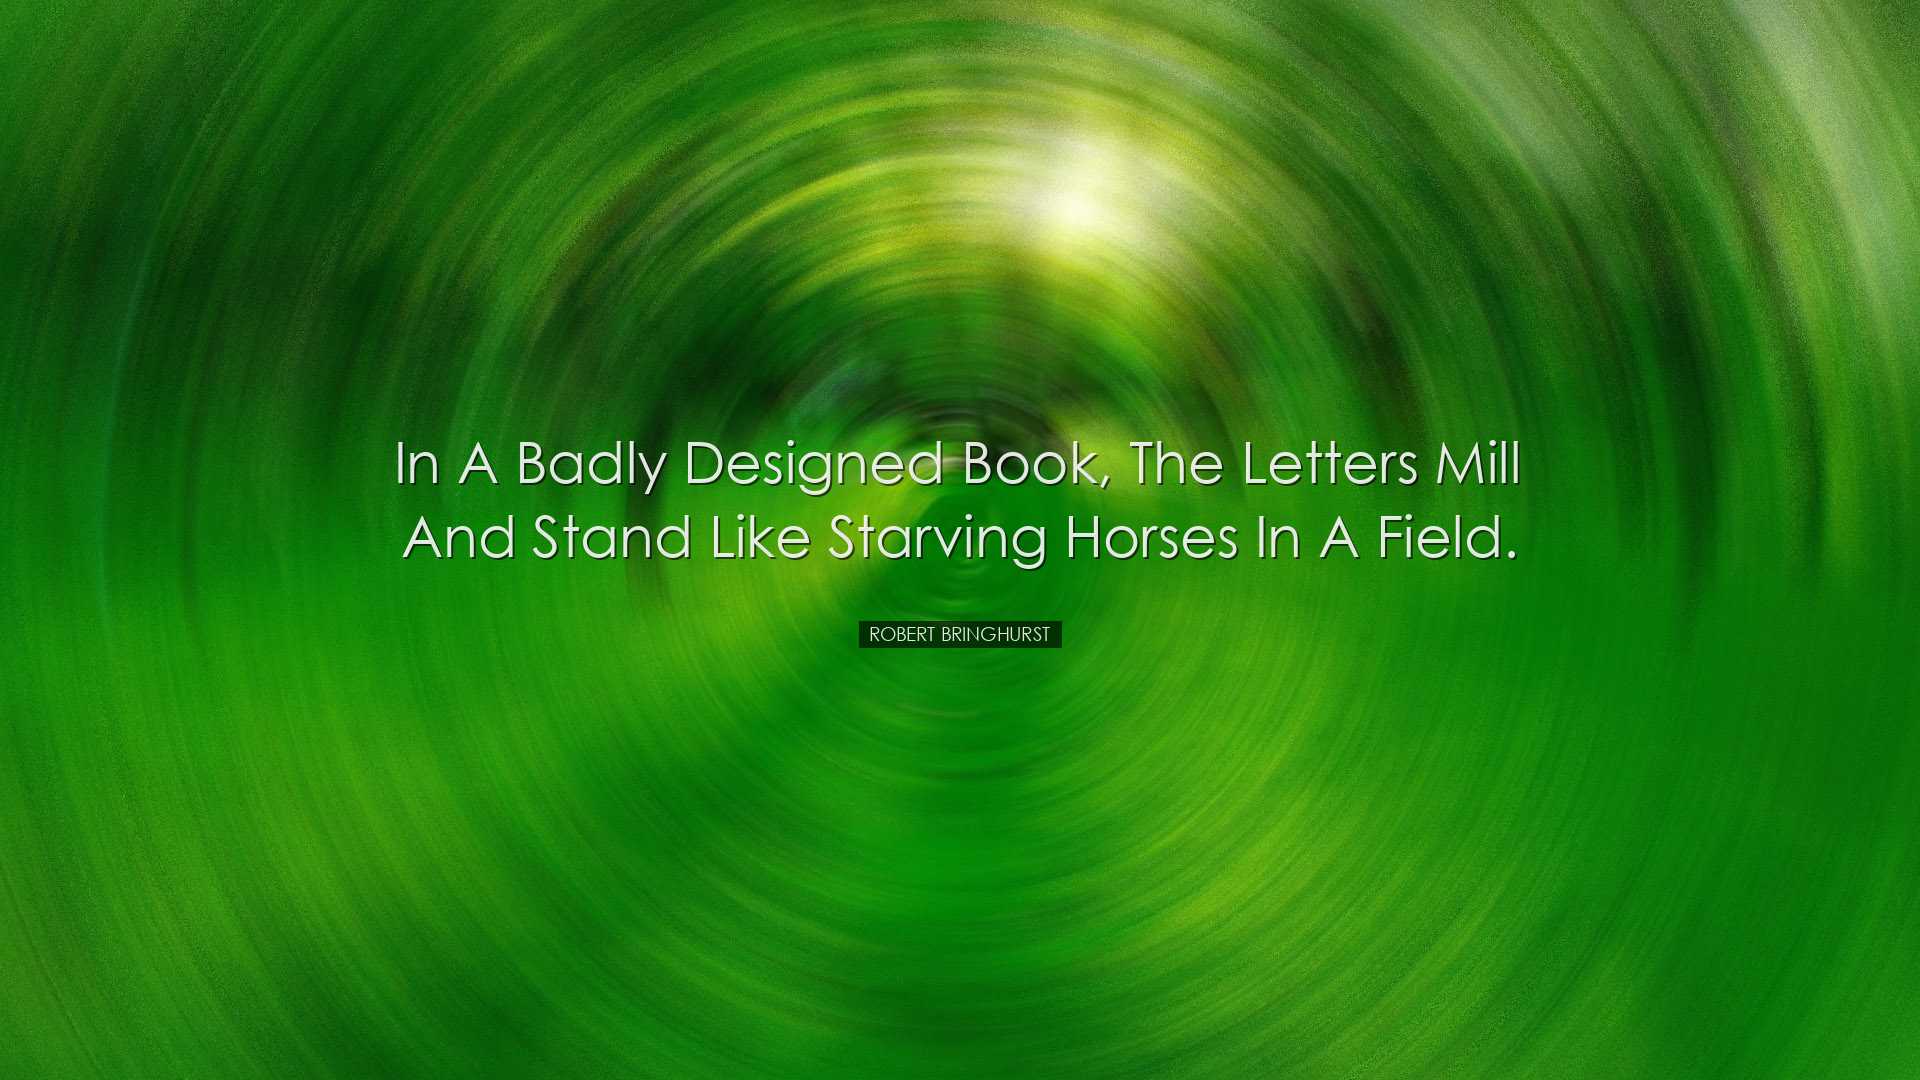 In a badly designed book, the letters mill and stand like starving